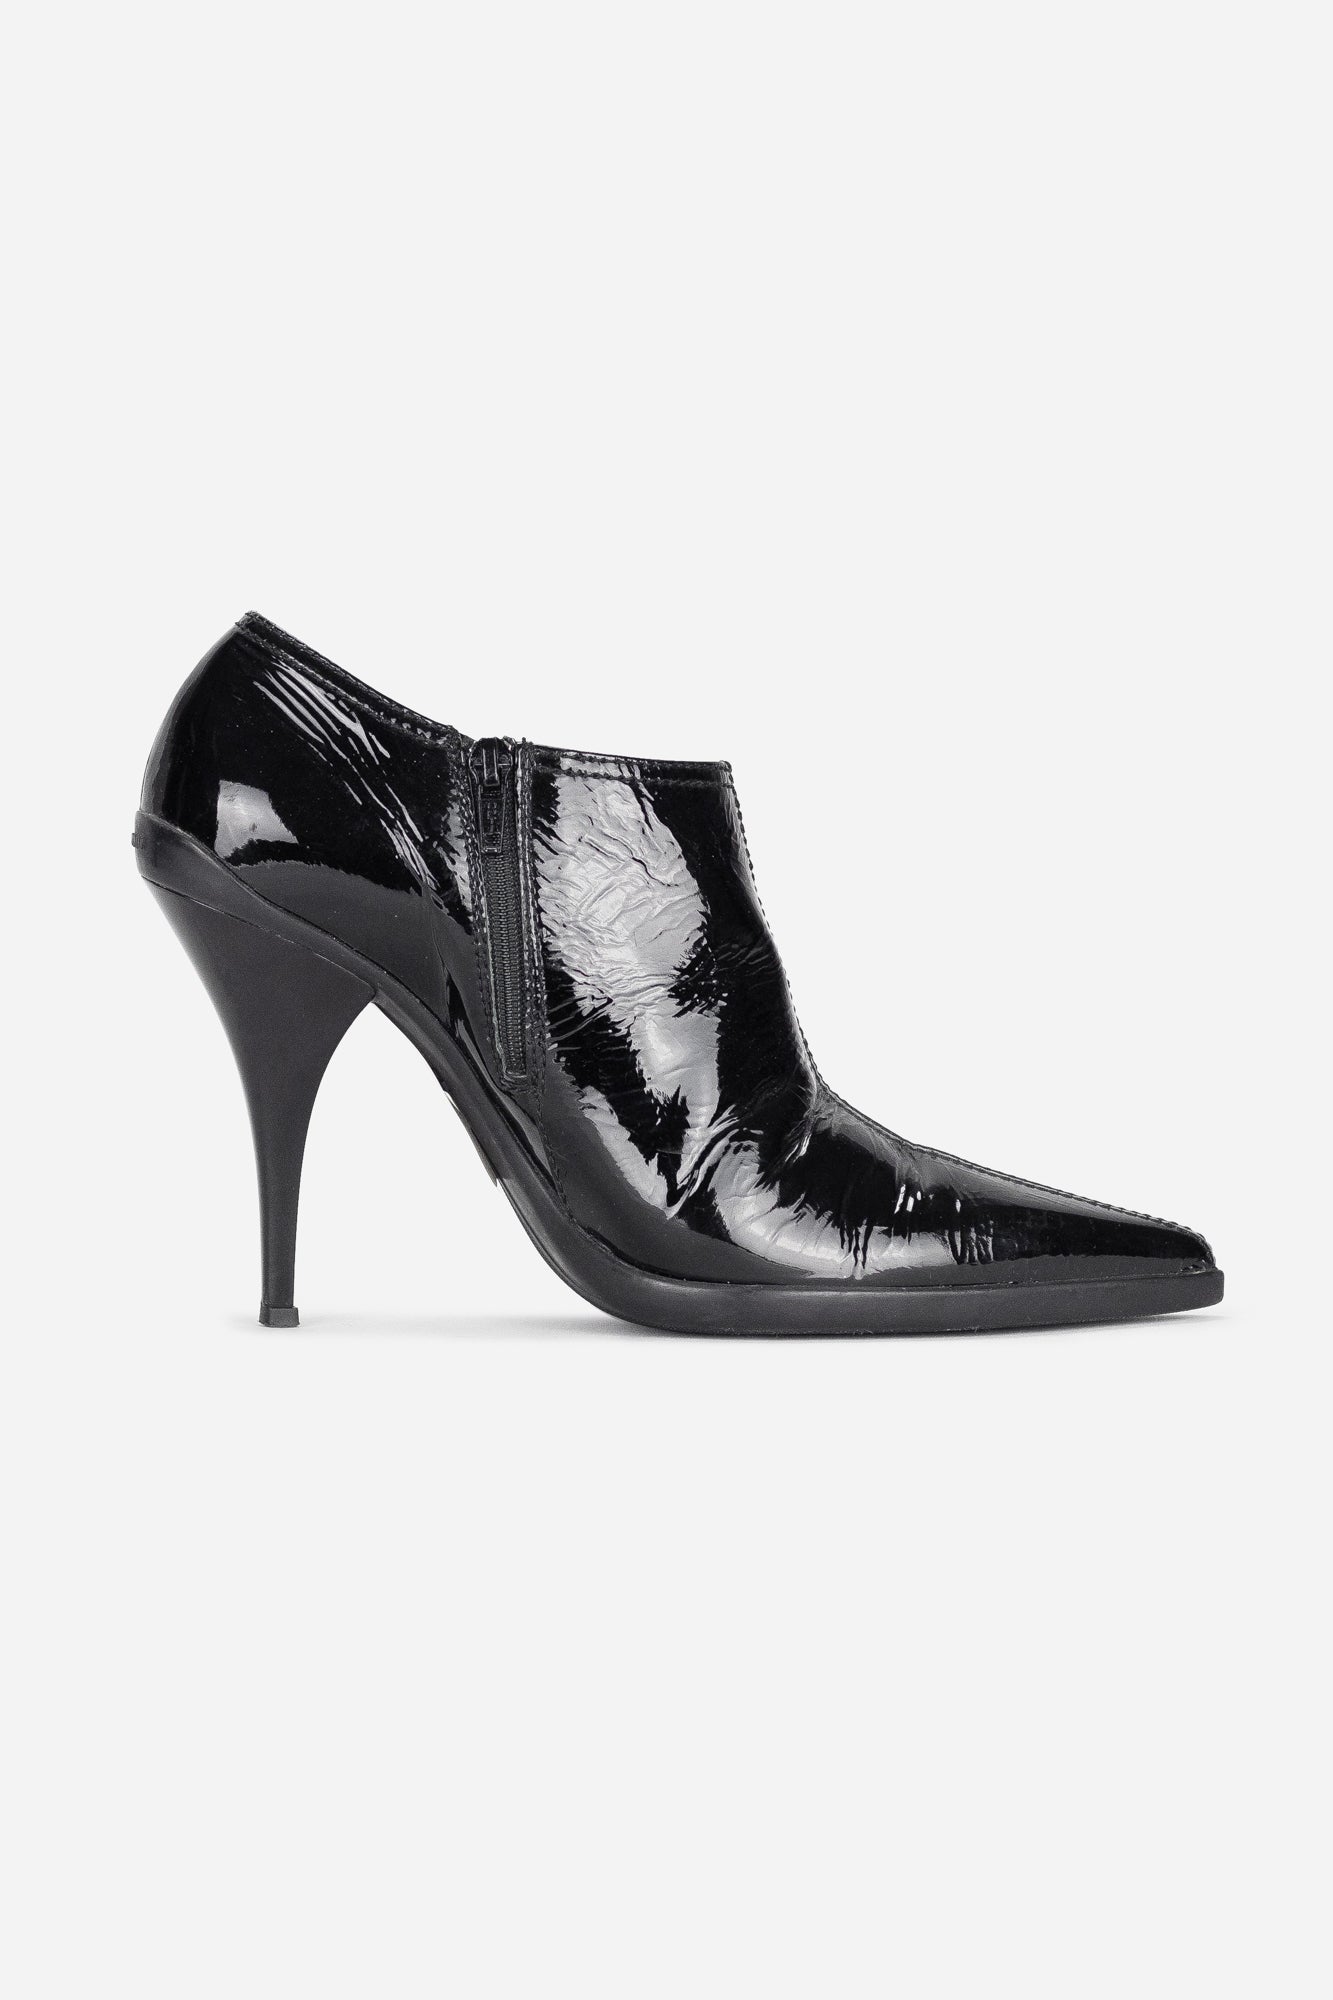 Black Patent Leather Pointed Toe Booties - So Over It Luxury Consignment